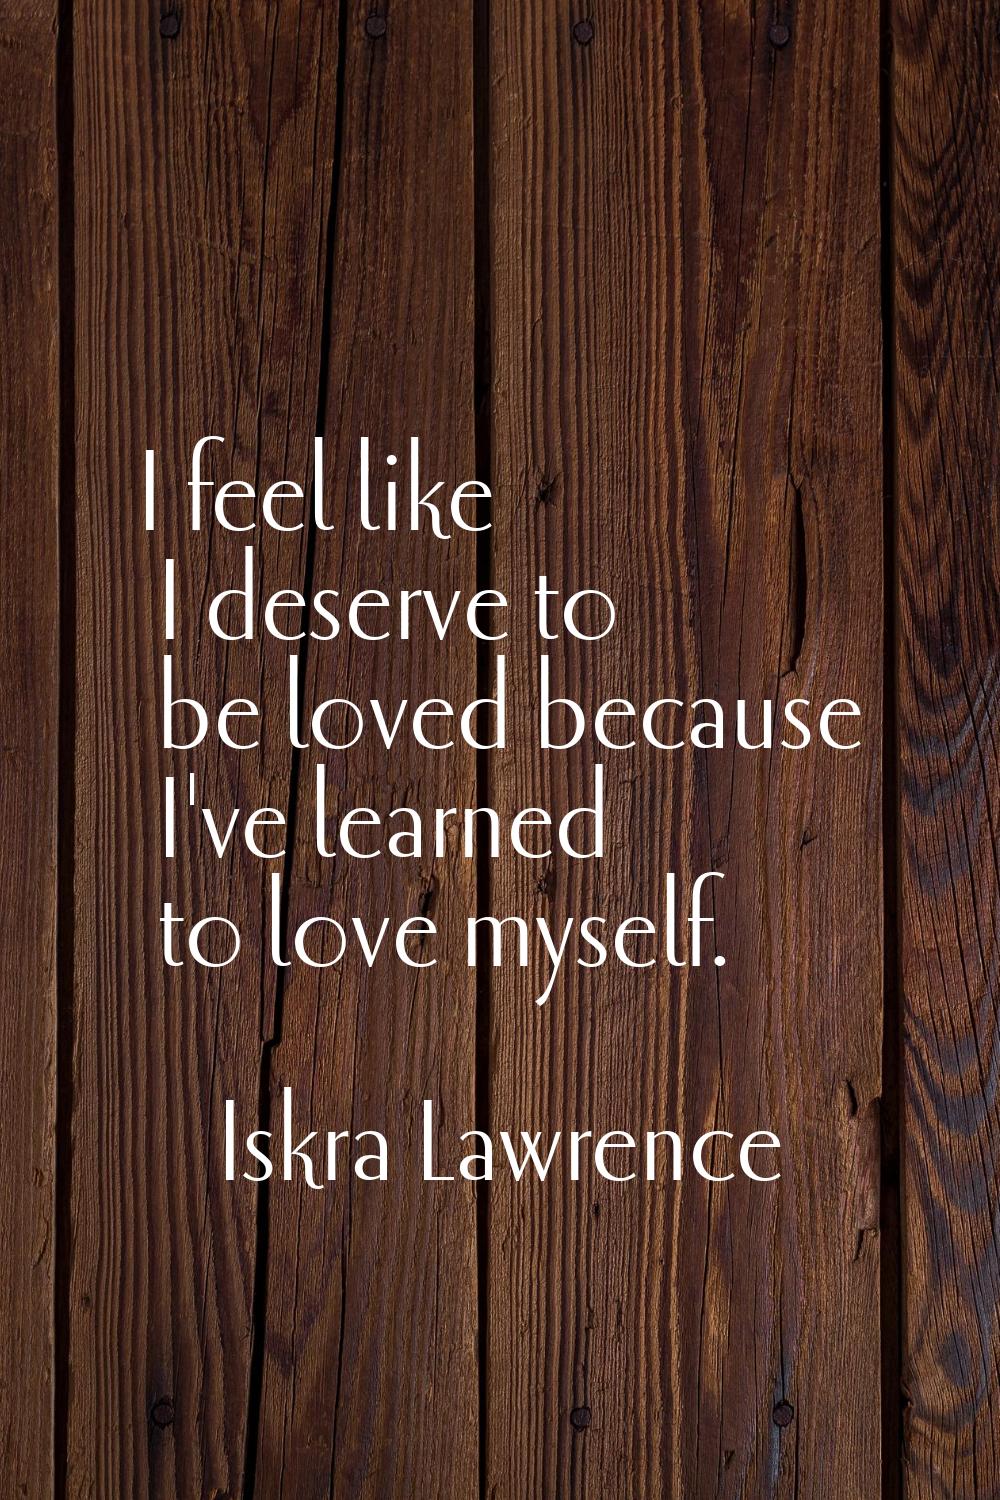 I feel like I deserve to be loved because I've learned to love myself.